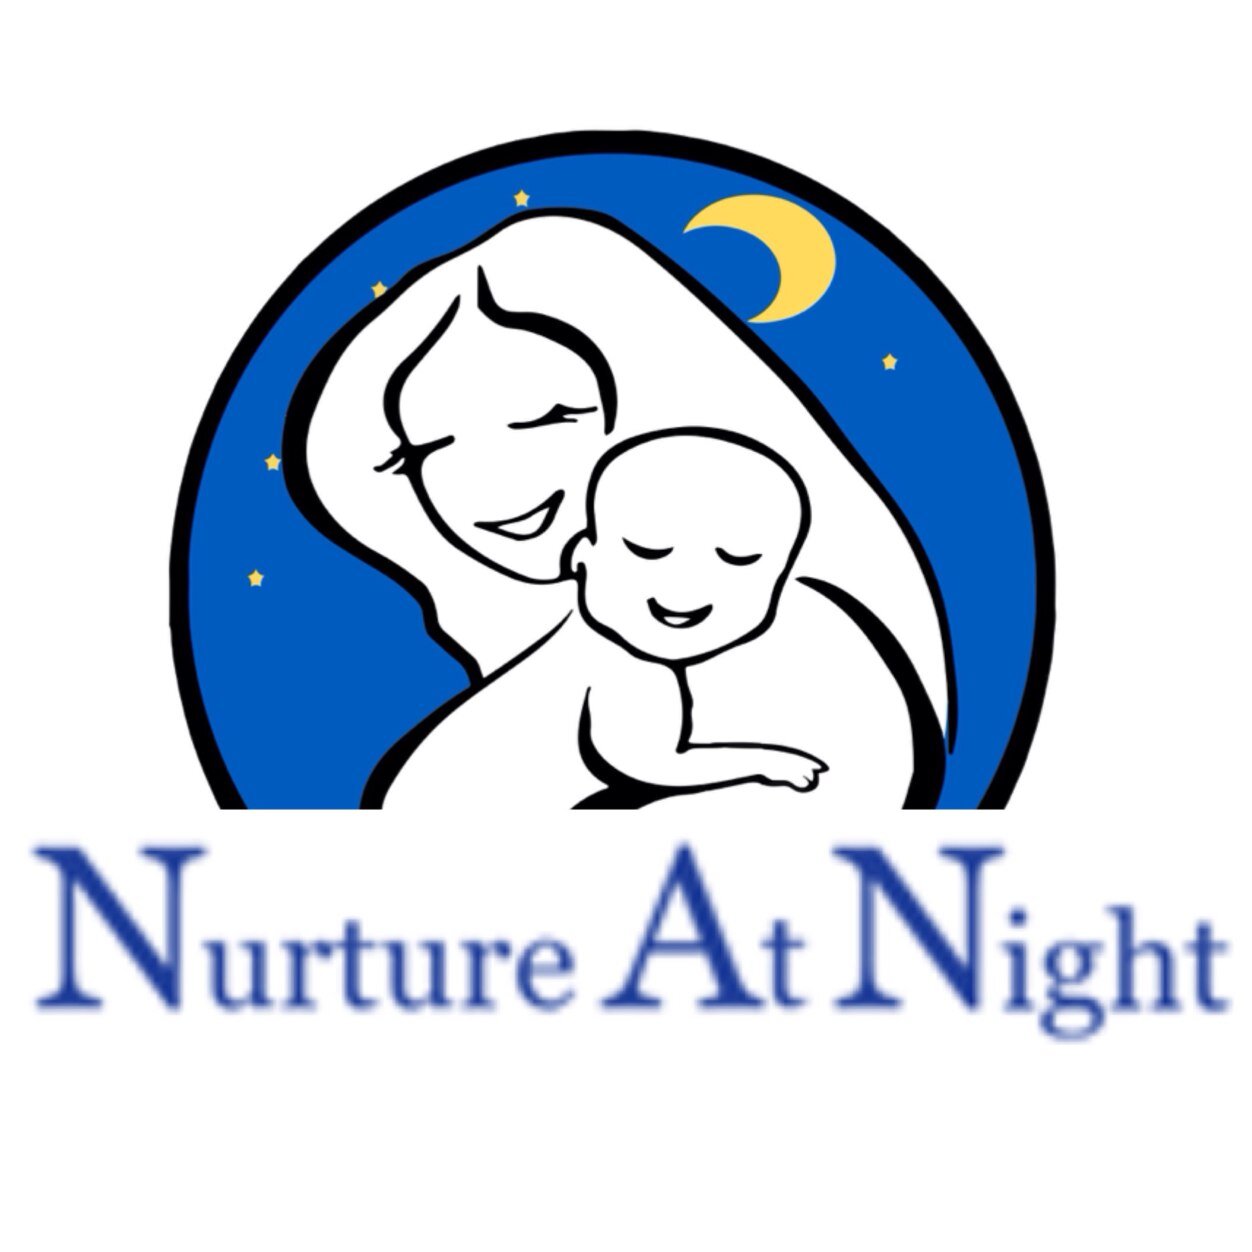 Baltimore's only exclusive baby nurse Agency. The #1 choice for overnight infant care. Nurturing the new, while preparing you Nurtureatnight@gmail.com